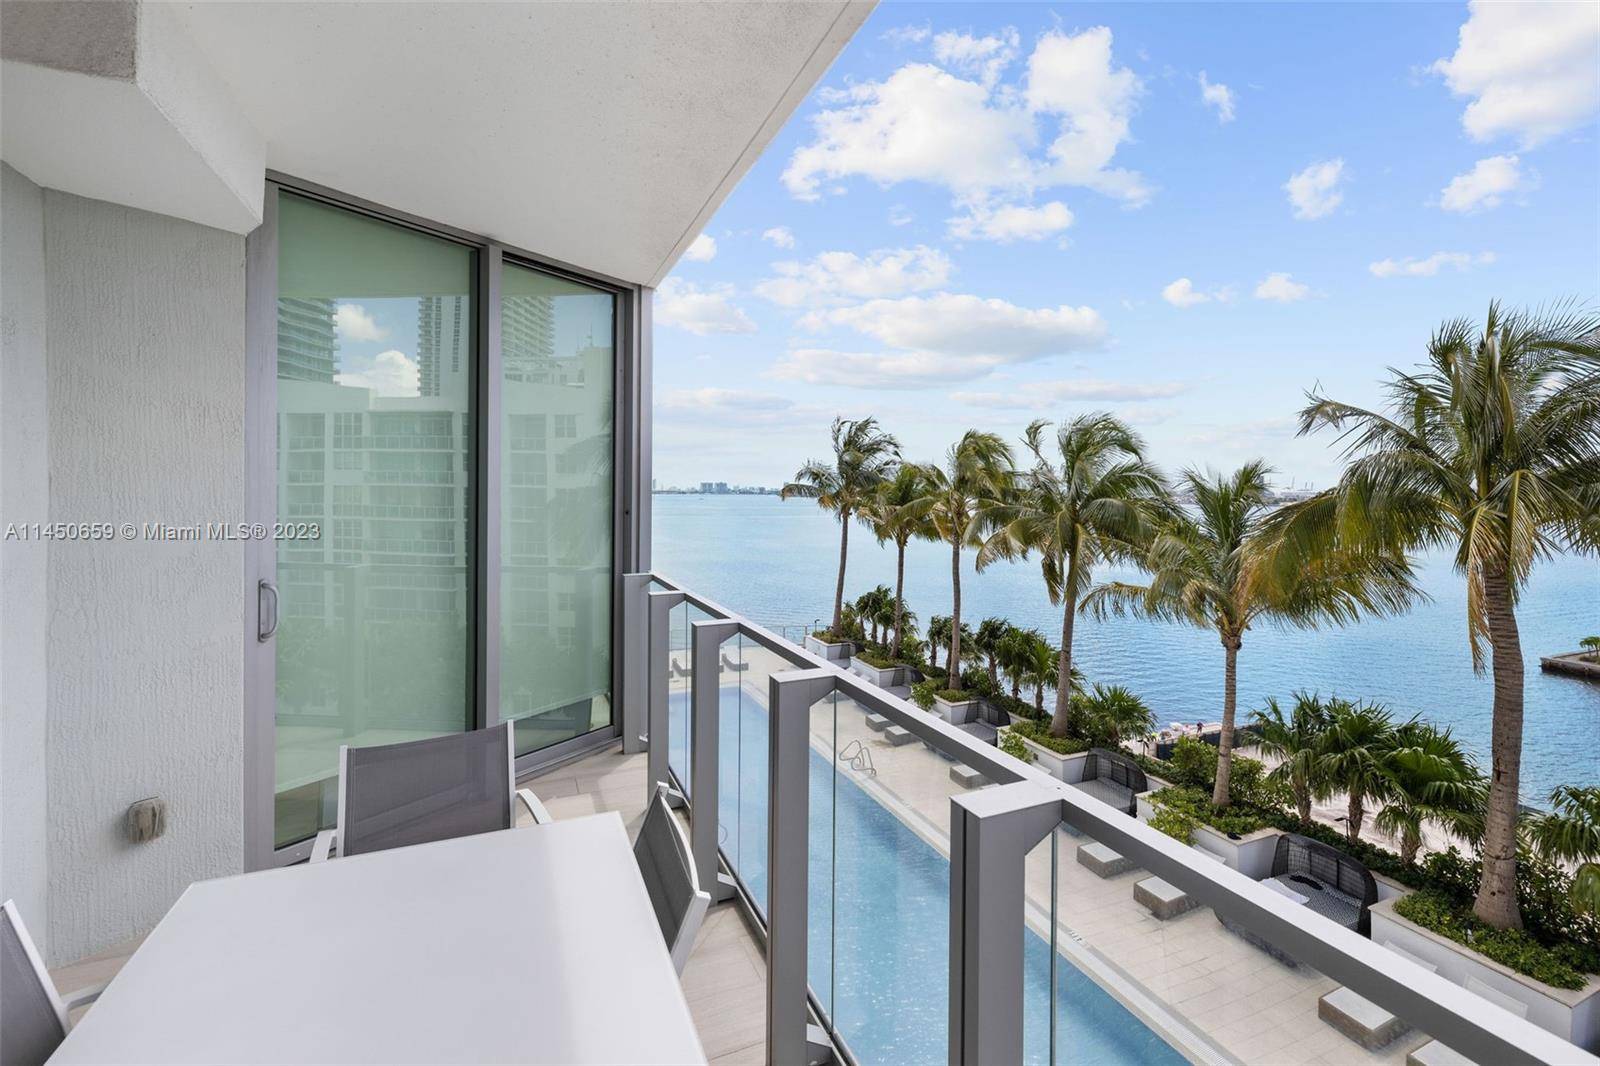 ONE BEDROOM PLUS DEN WITH PRIVATE ELEVATOR ENTRY AT ONE OF EDGEWATER'S PREMIERE RESORT STYLE BUILDINGS.